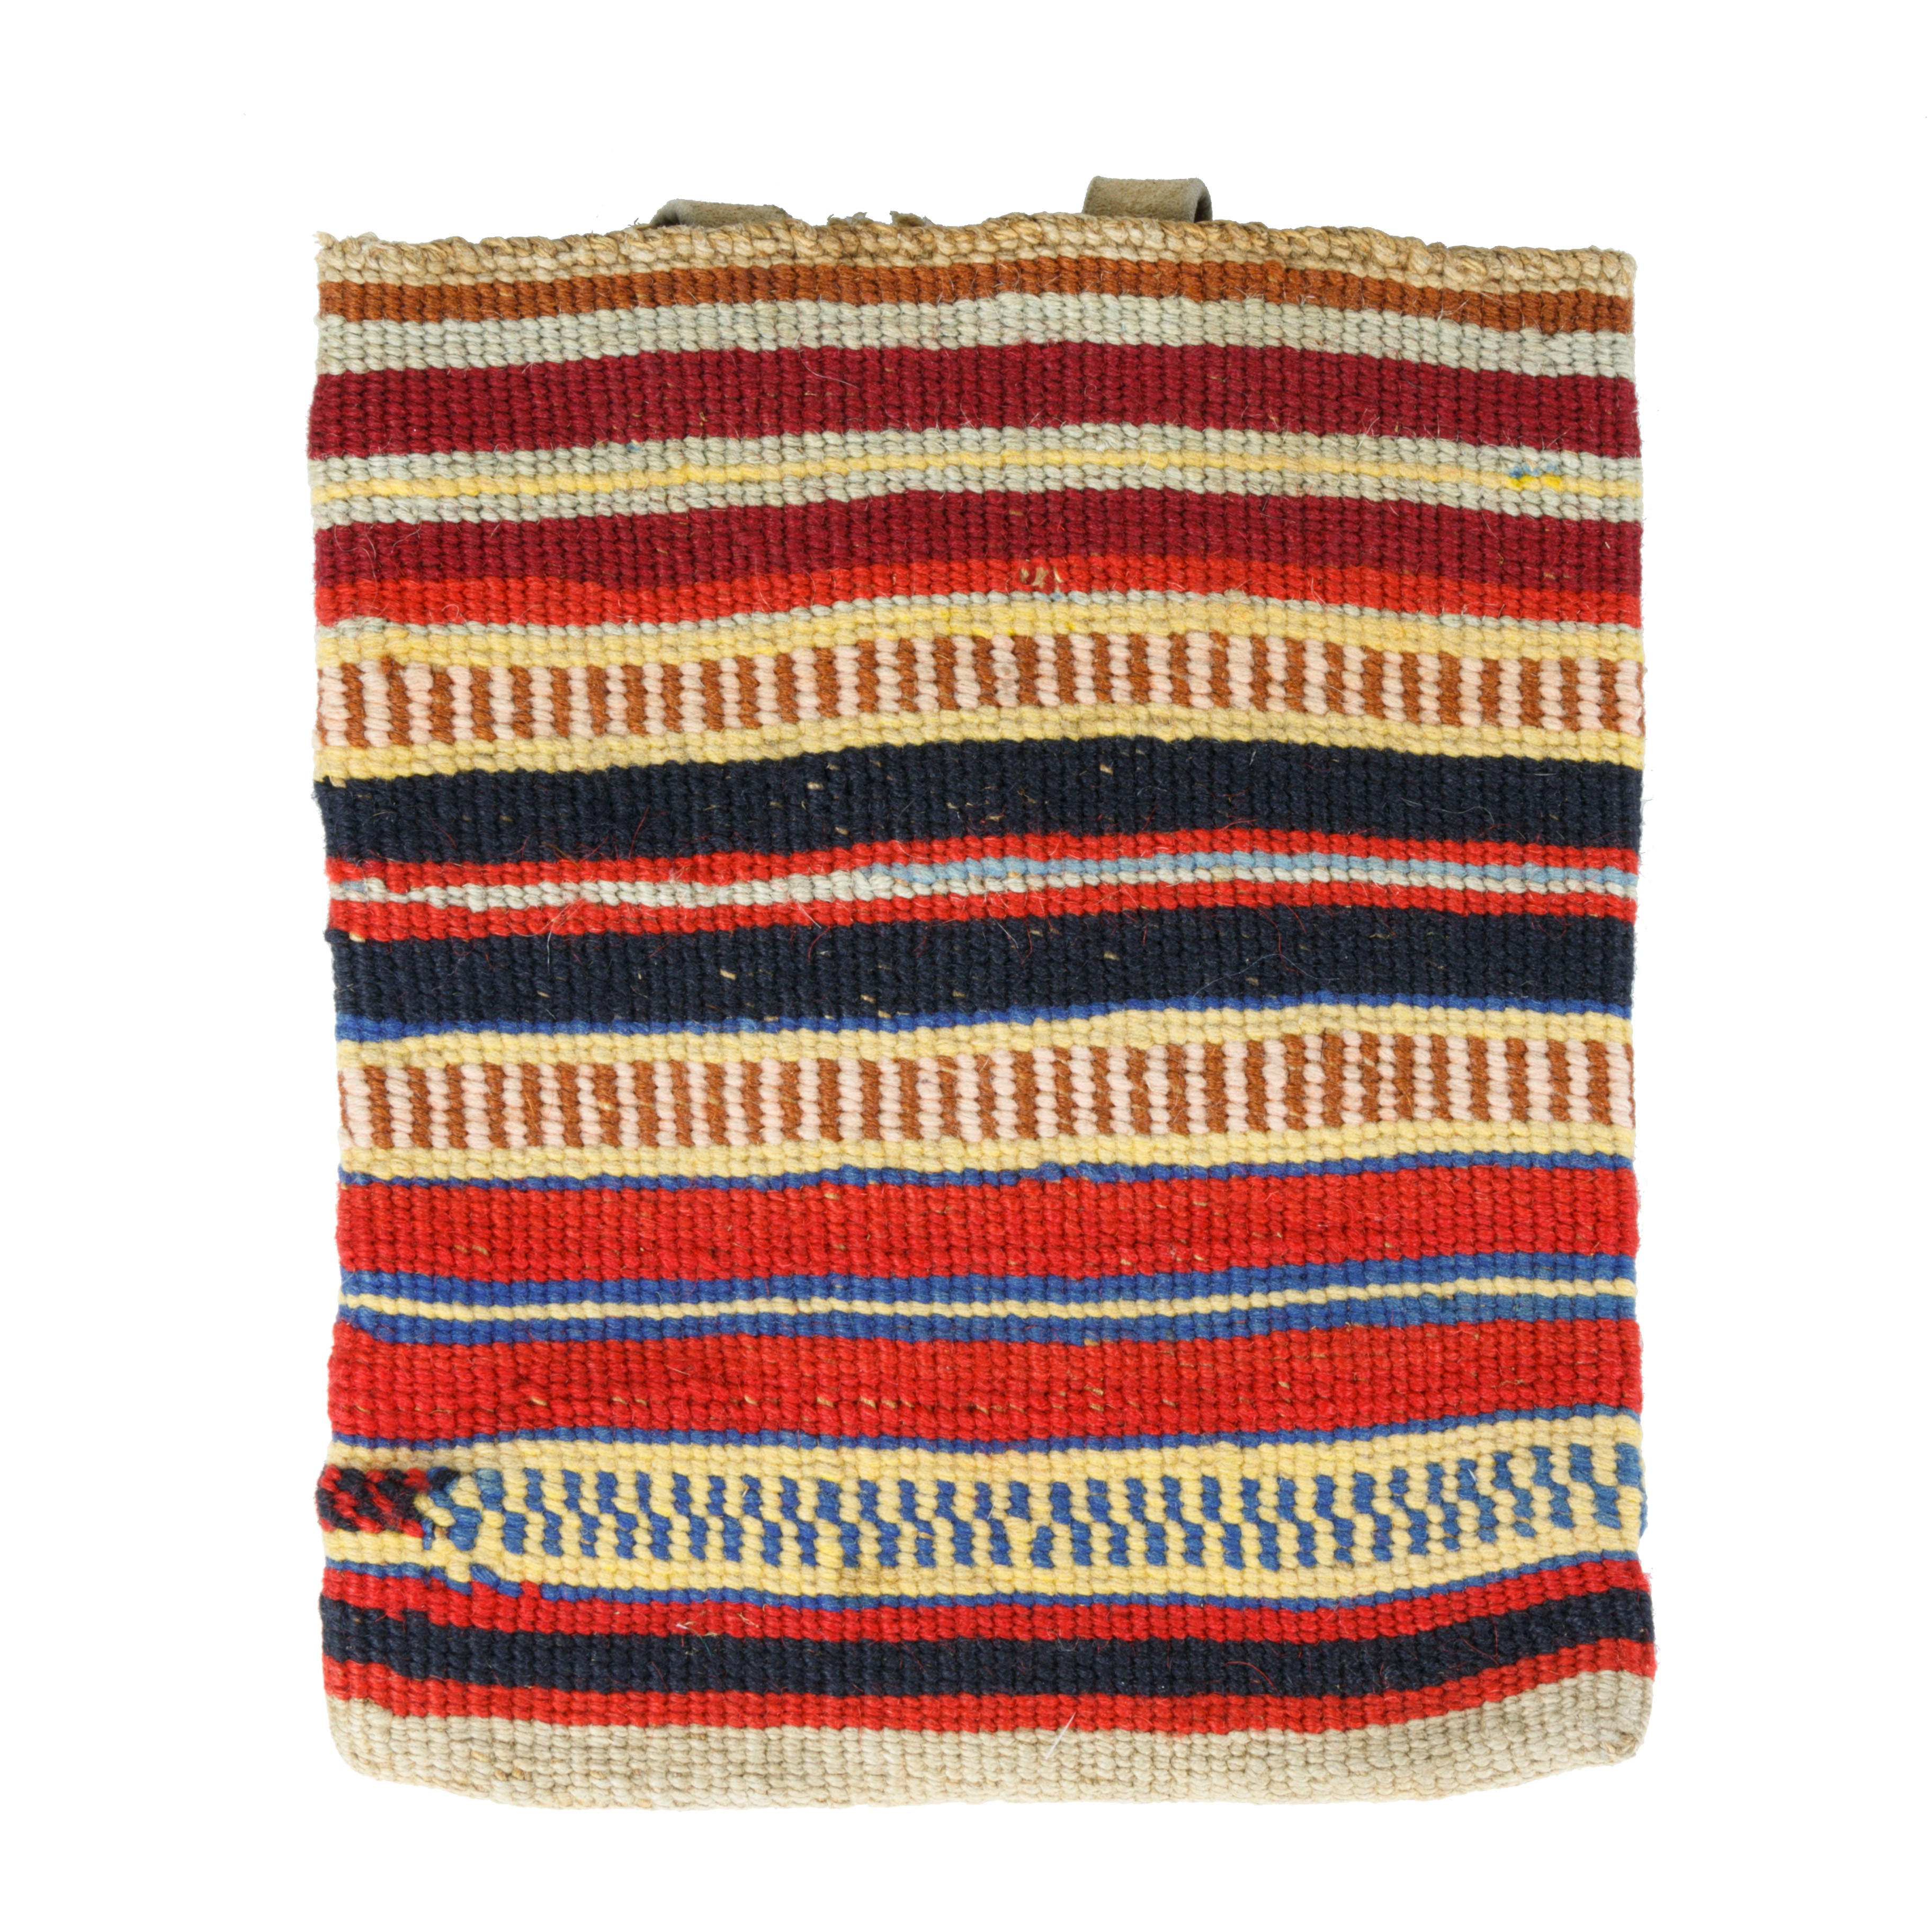 Nez Perce Embroidered Flat Bags